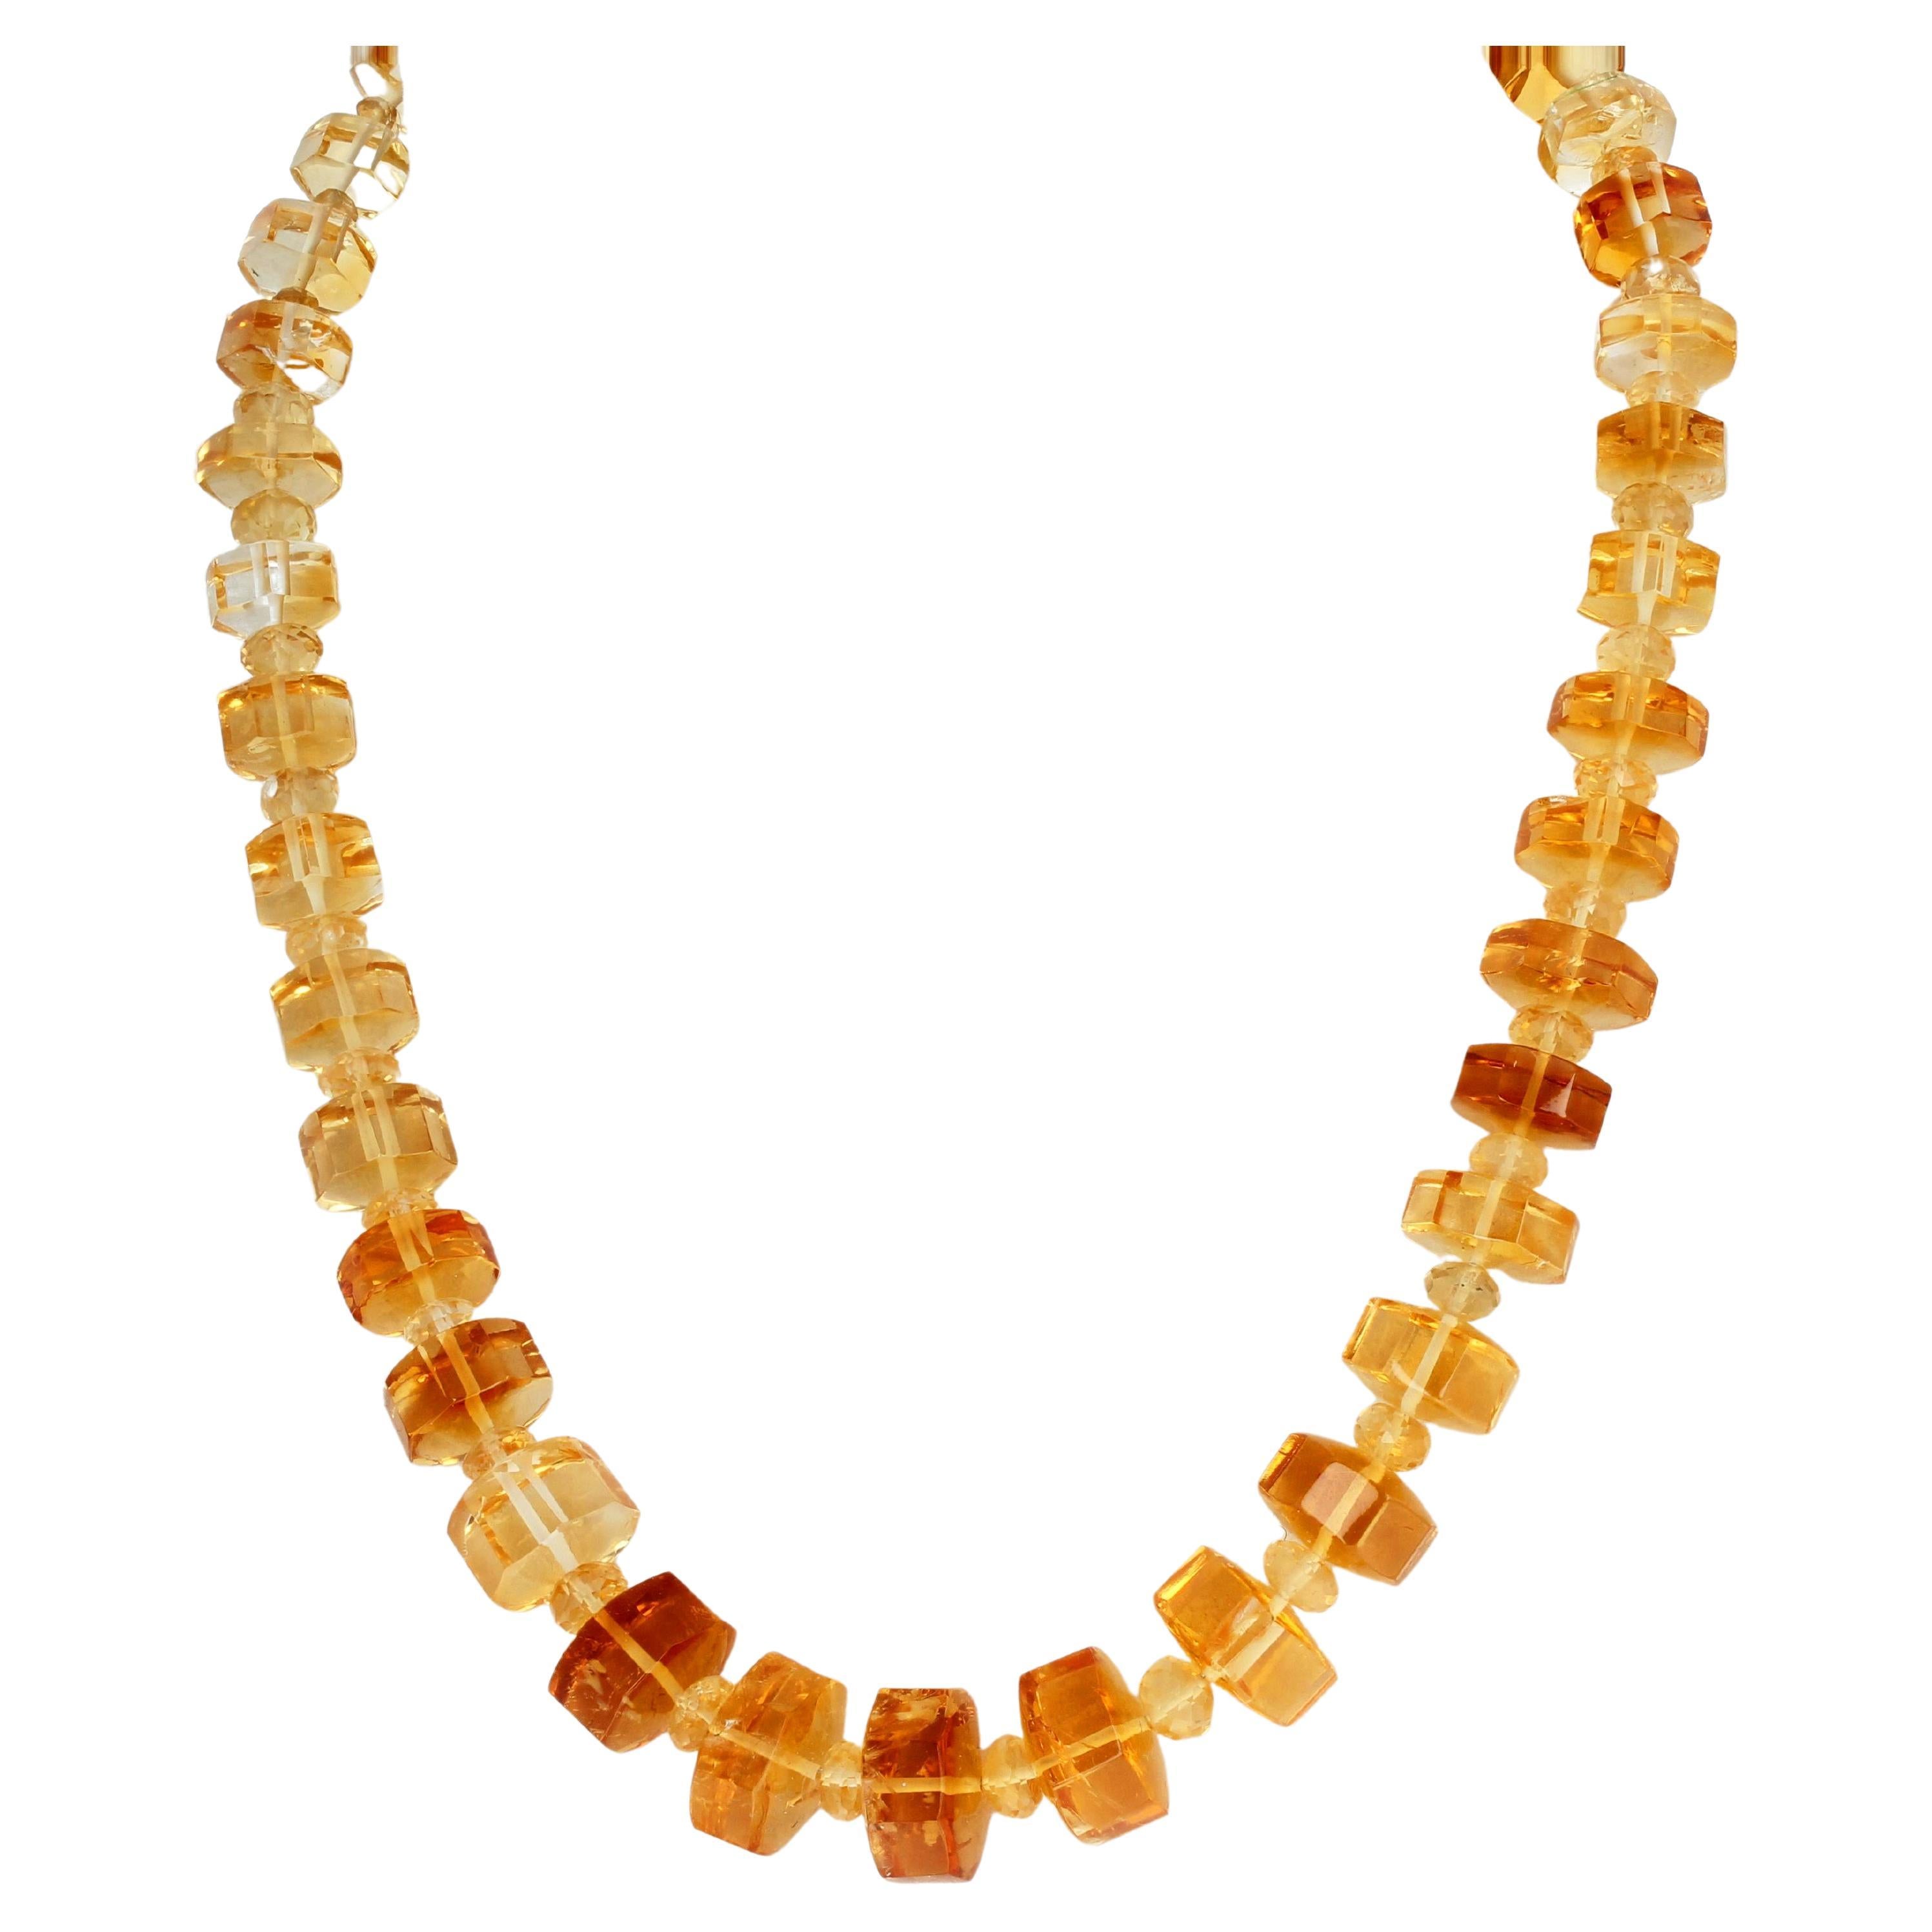 AJD Spectacular Sophisticated 280 Cts of Citrines and Citrine Bead Necklace